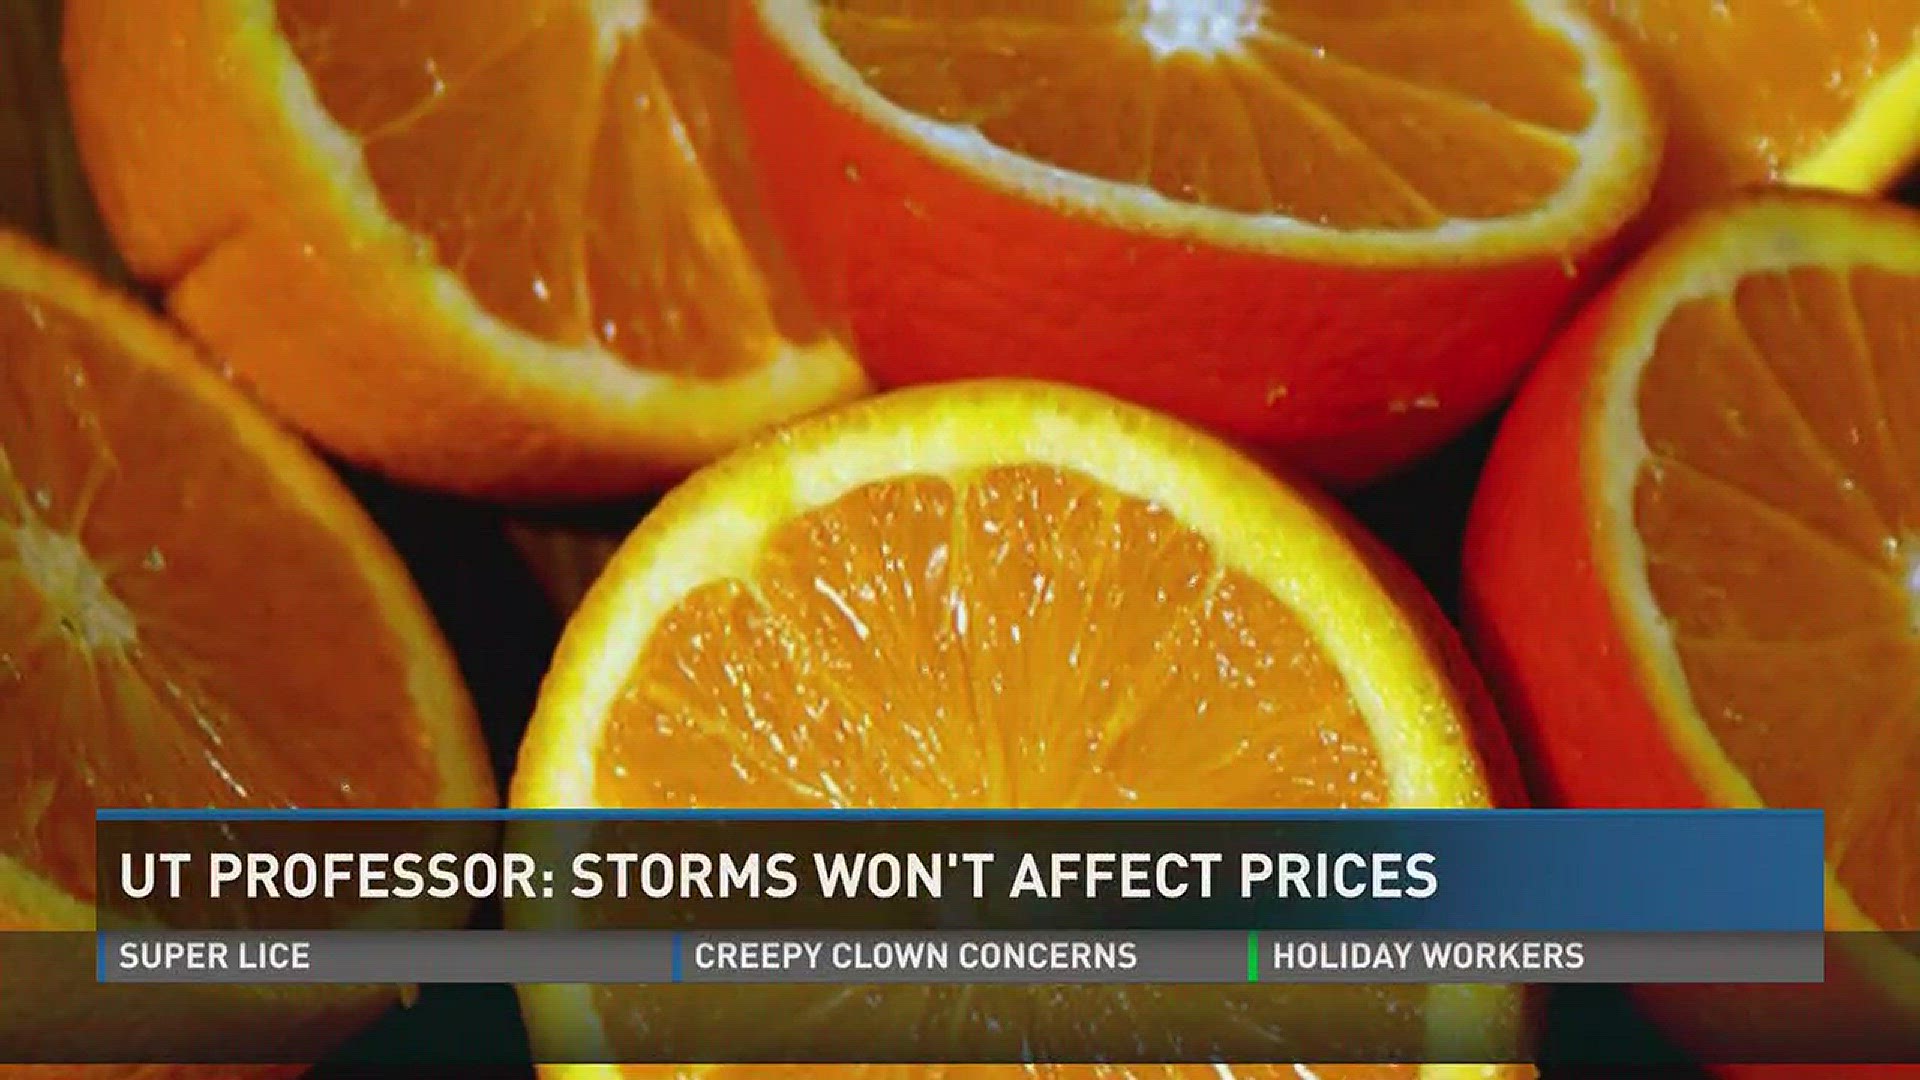 Sept. 13, 2017: Hurricanes Irma and Harvey have also sent prices climbing on products like beef and citrus fruit, but a UT professor said there likely won't be a drastic impact on grocery prices.